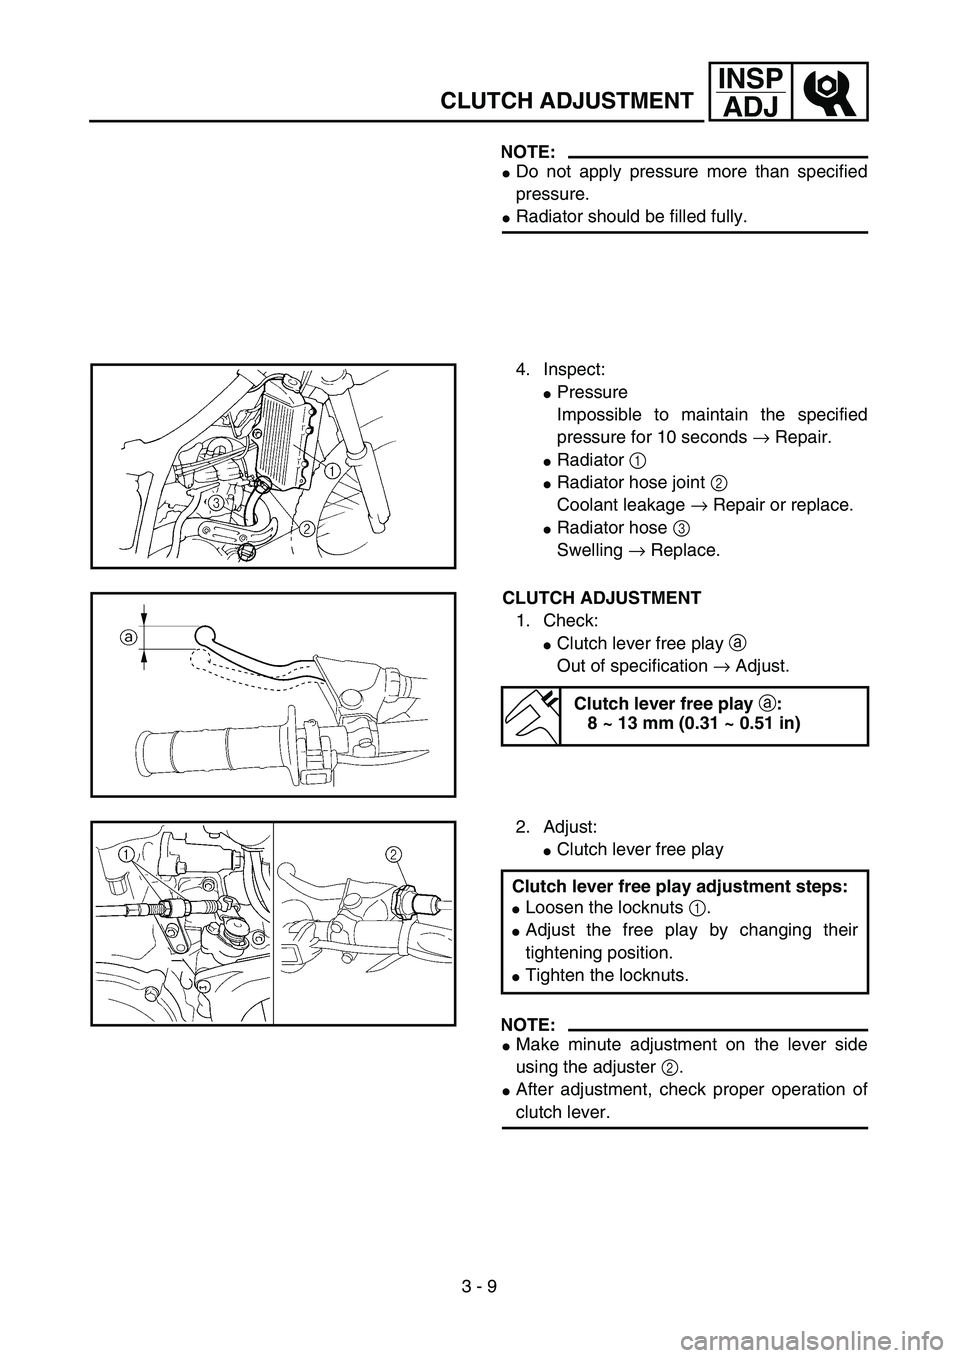 YAMAHA YZ250F 2002  Notices Demploi (in French) 3 - 9
INSP
ADJ
CLUTCH ADJUSTMENT
NOTE:
Do not apply pressure more than specified
pressure.
Radiator should be filled fully.
4. Inspect:
Pressure
Impossible to maintain the specified
pressure for 10